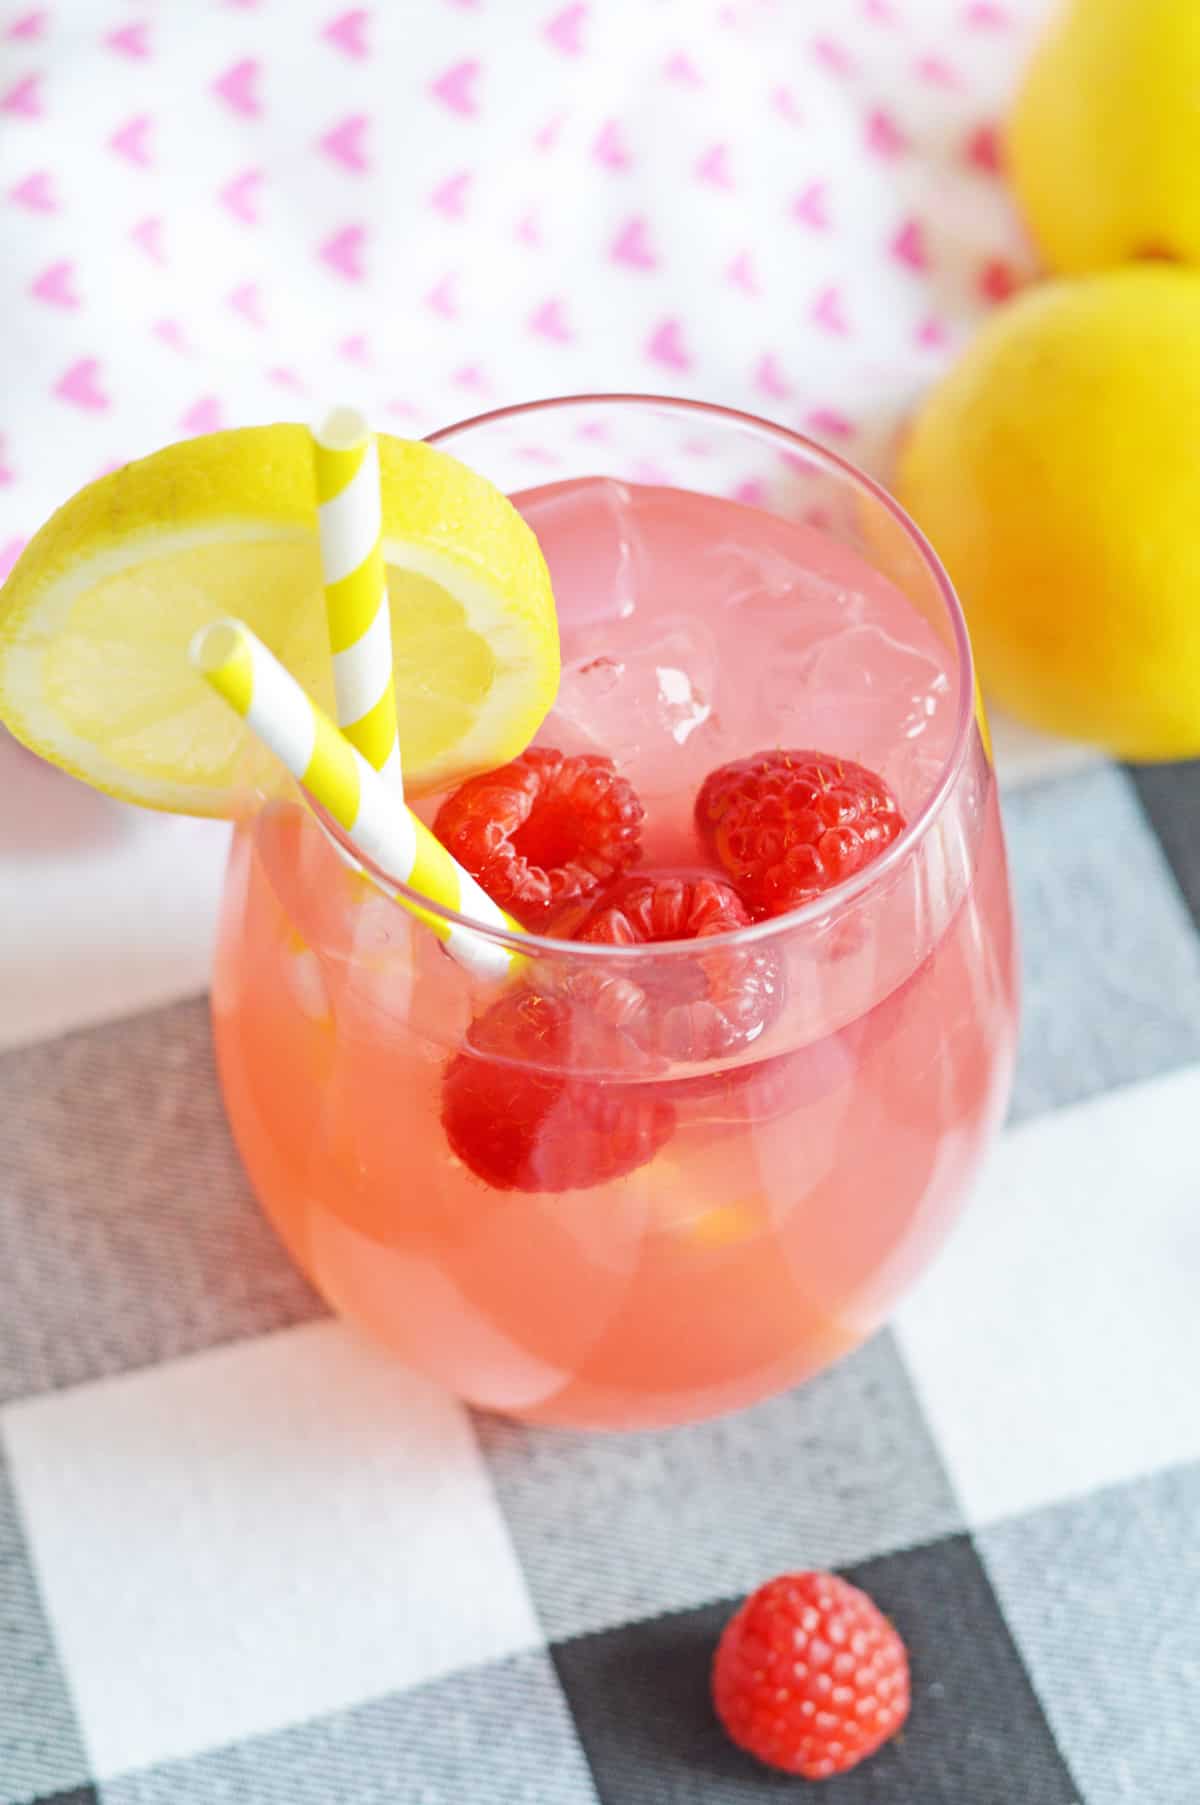 Raspberry lemonade cocktail made with vodka and garnished with fresh raspberries and a lemon slice.